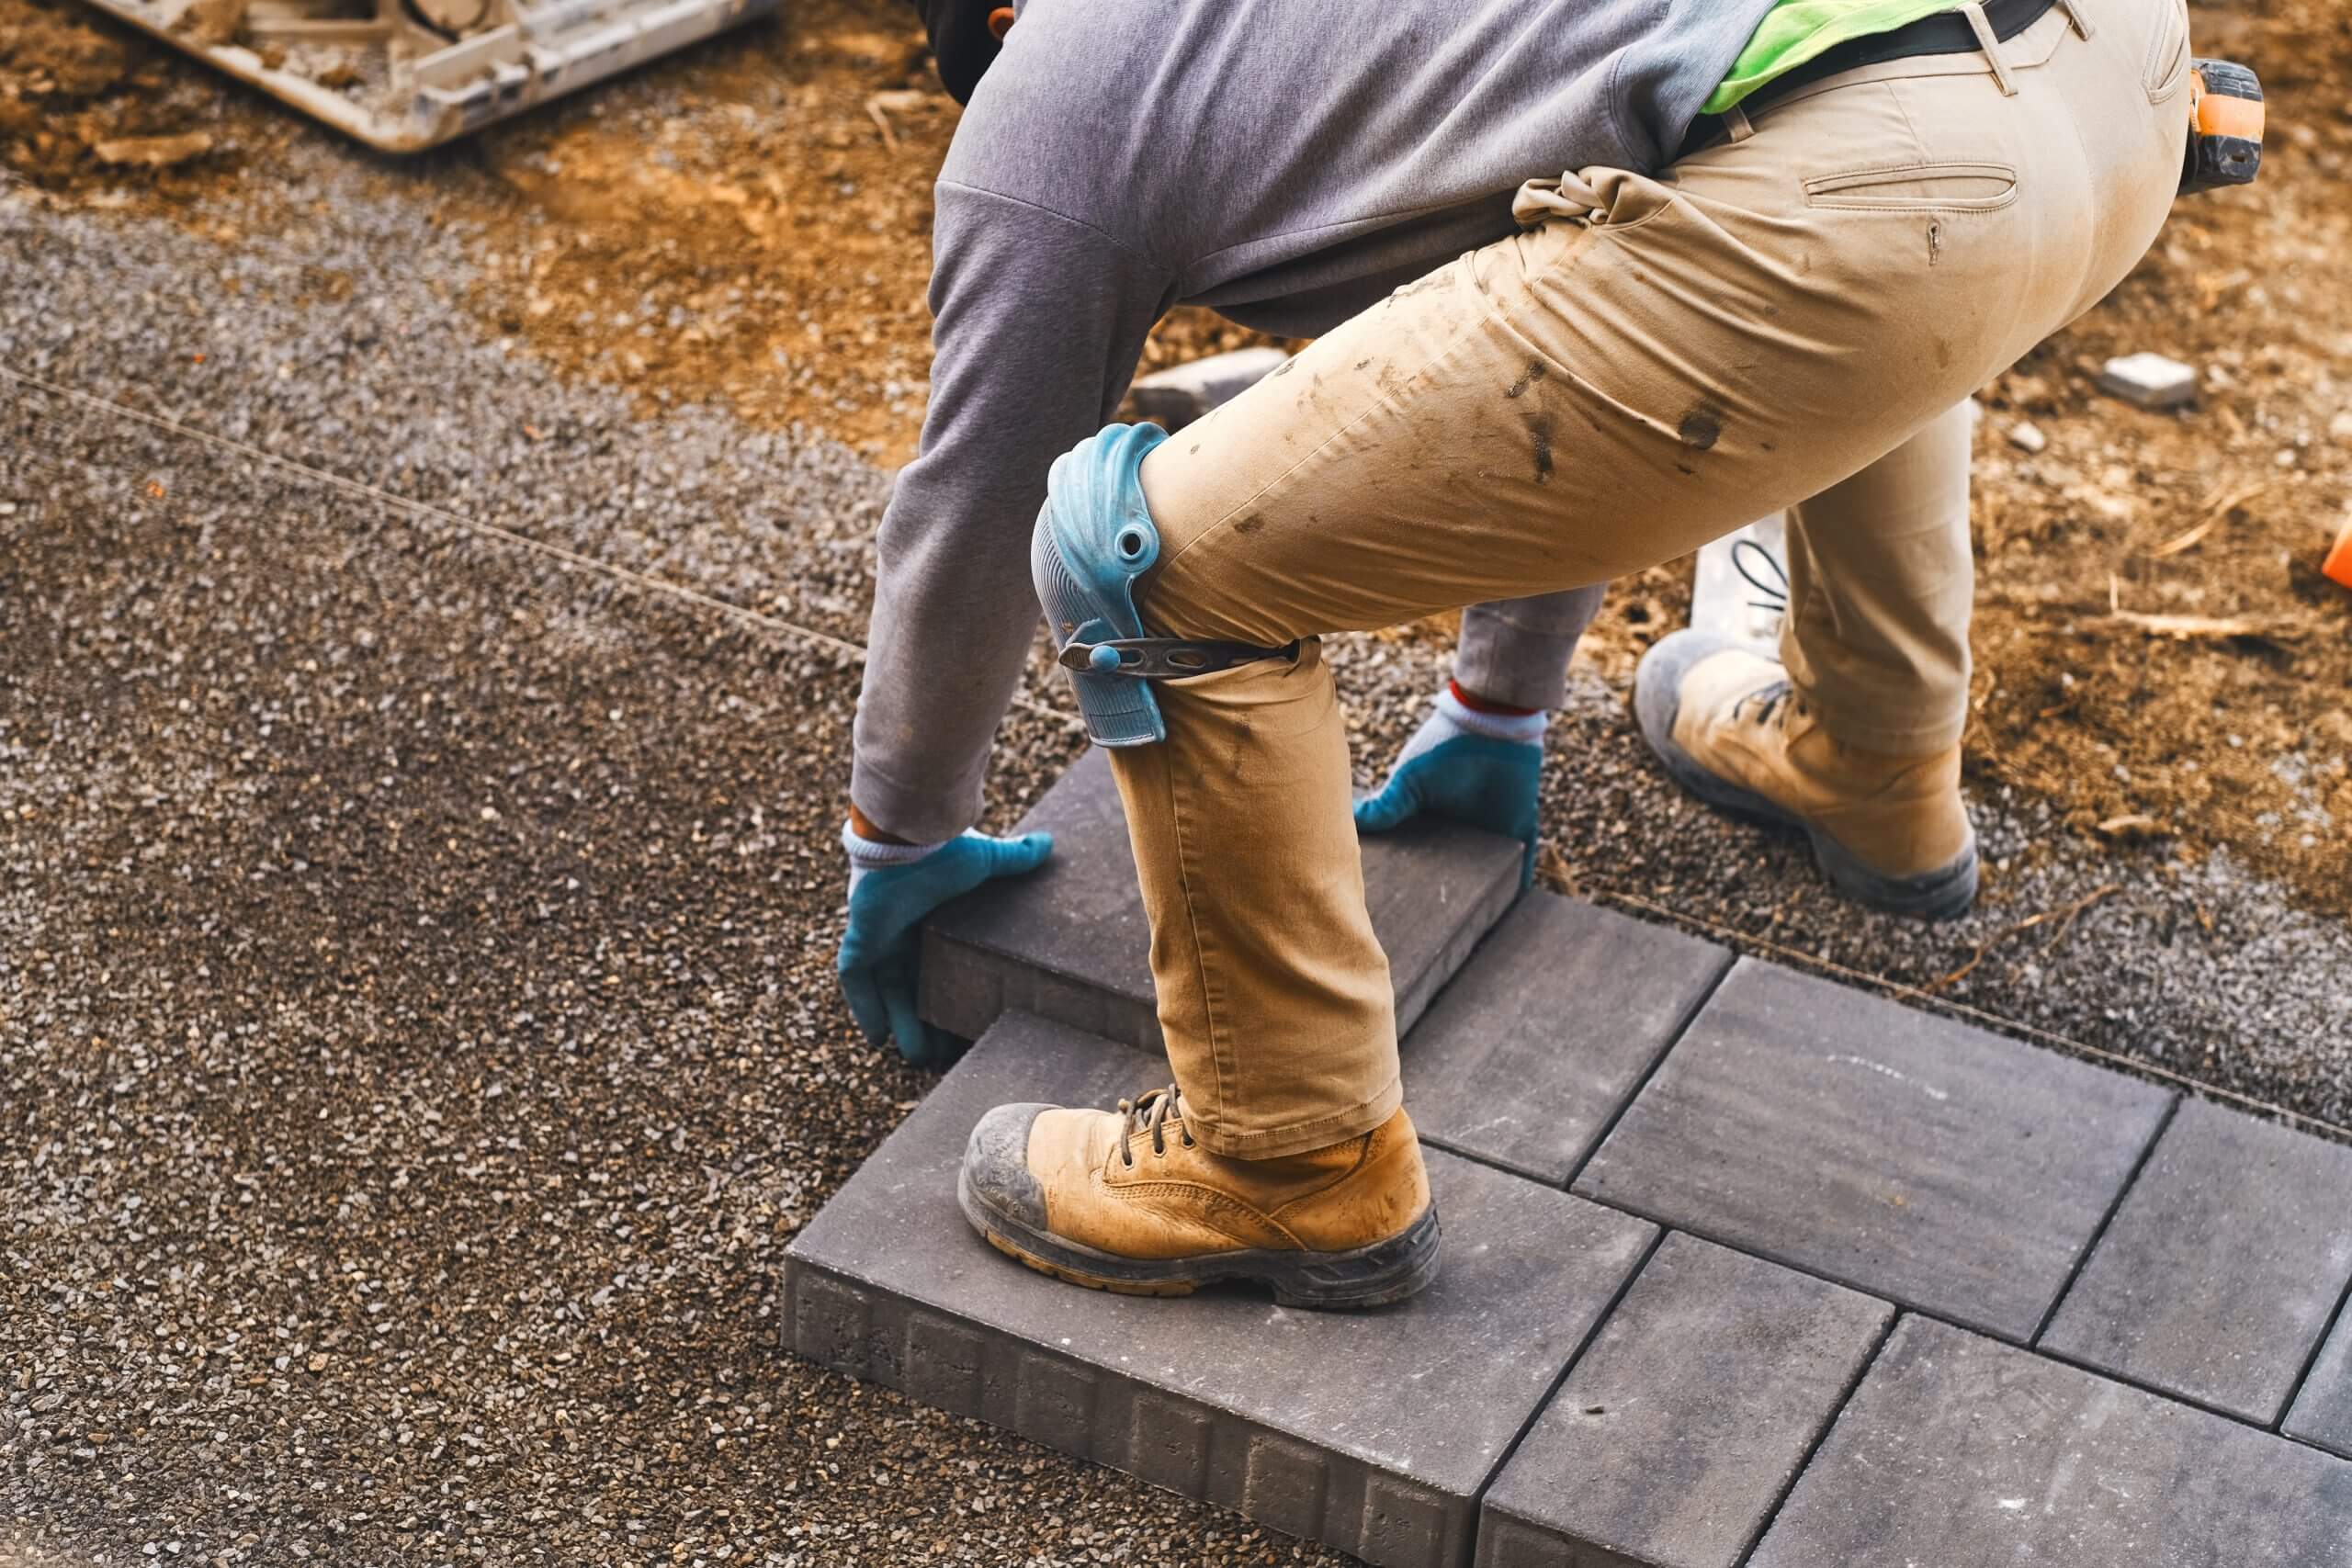 Landscaping paver worker laying paving stones on sandy ground of construction patio yard site in spring summer. Contractor wearing safety protective cloth, gloves and knee pads for installation work.